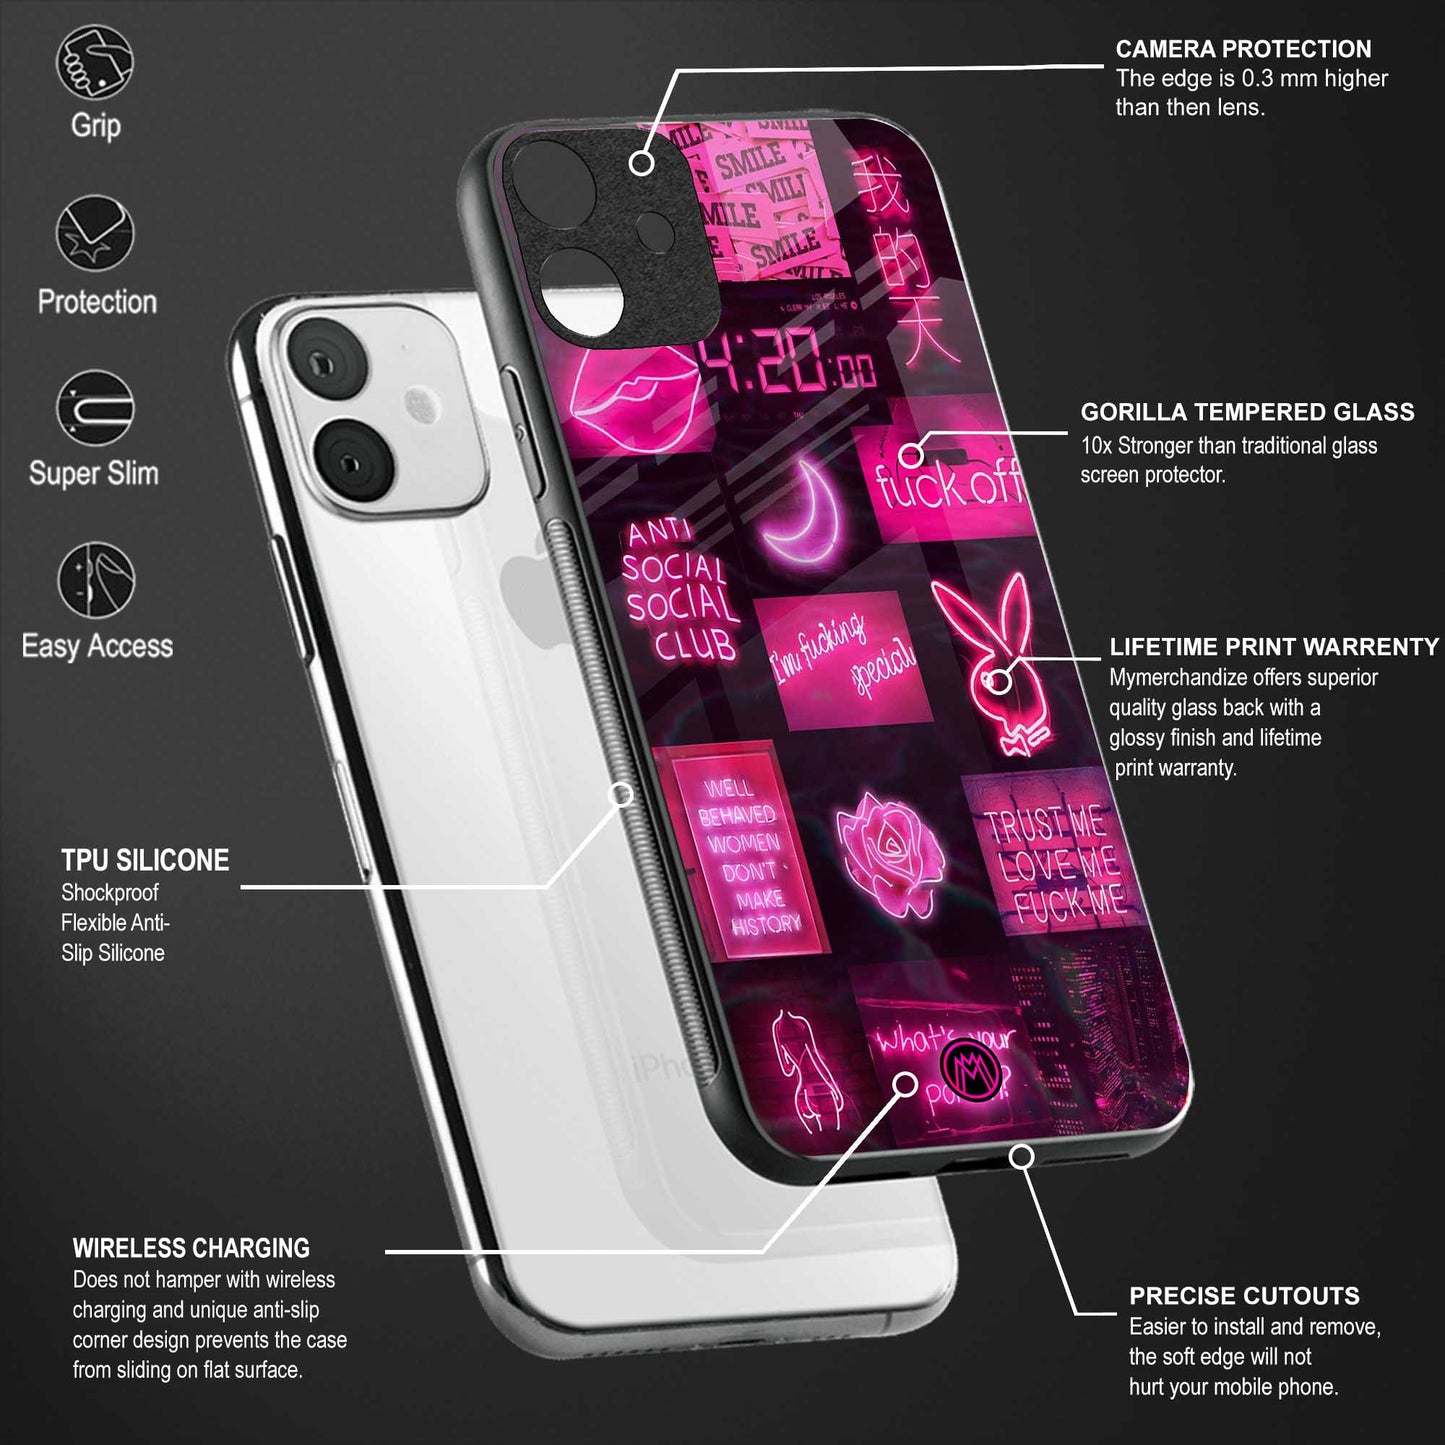 black pink aesthetic collage back phone cover | glass case for vivo y22